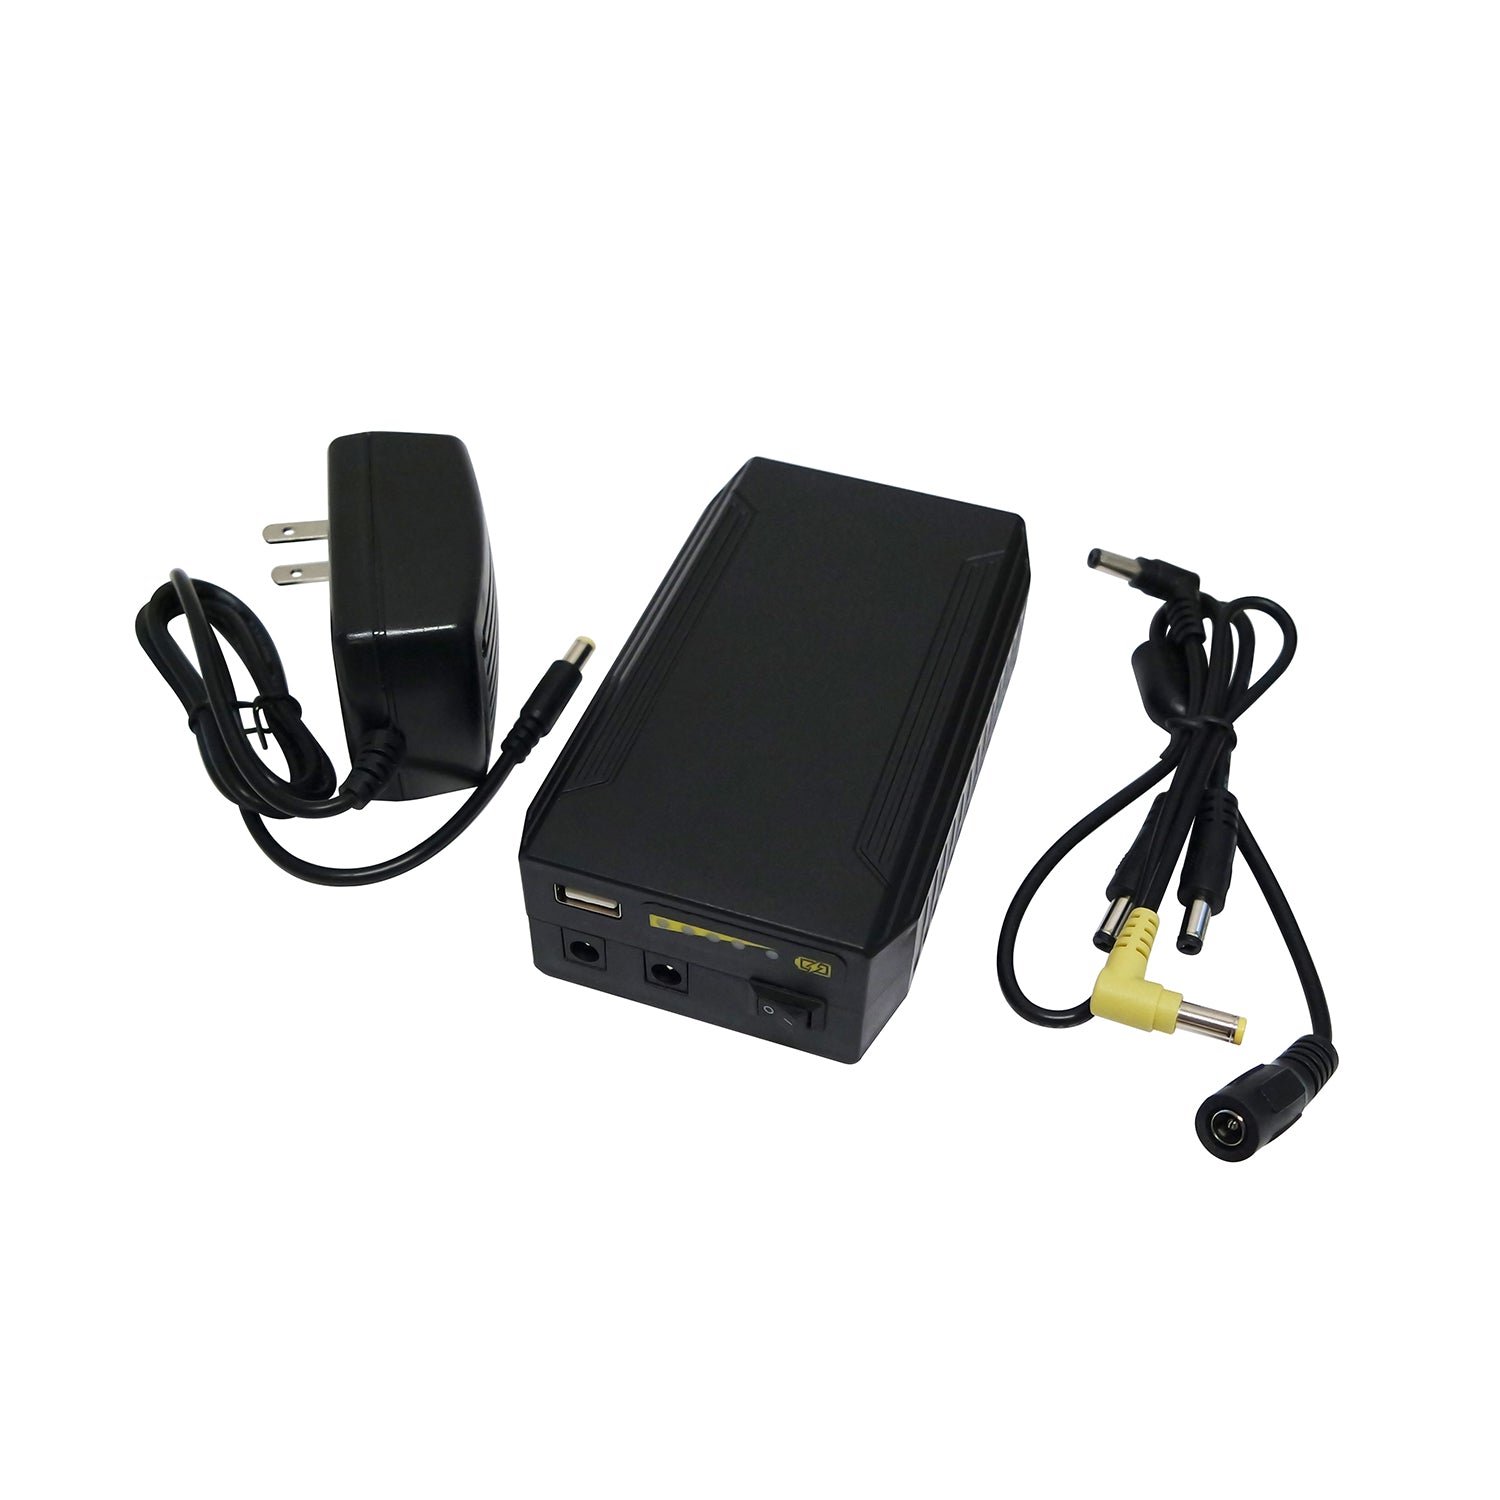 PowerBlock Rechargeable Lithium Ion Battery Pack -GNSS Receivers- eGPS Solutions Inc.